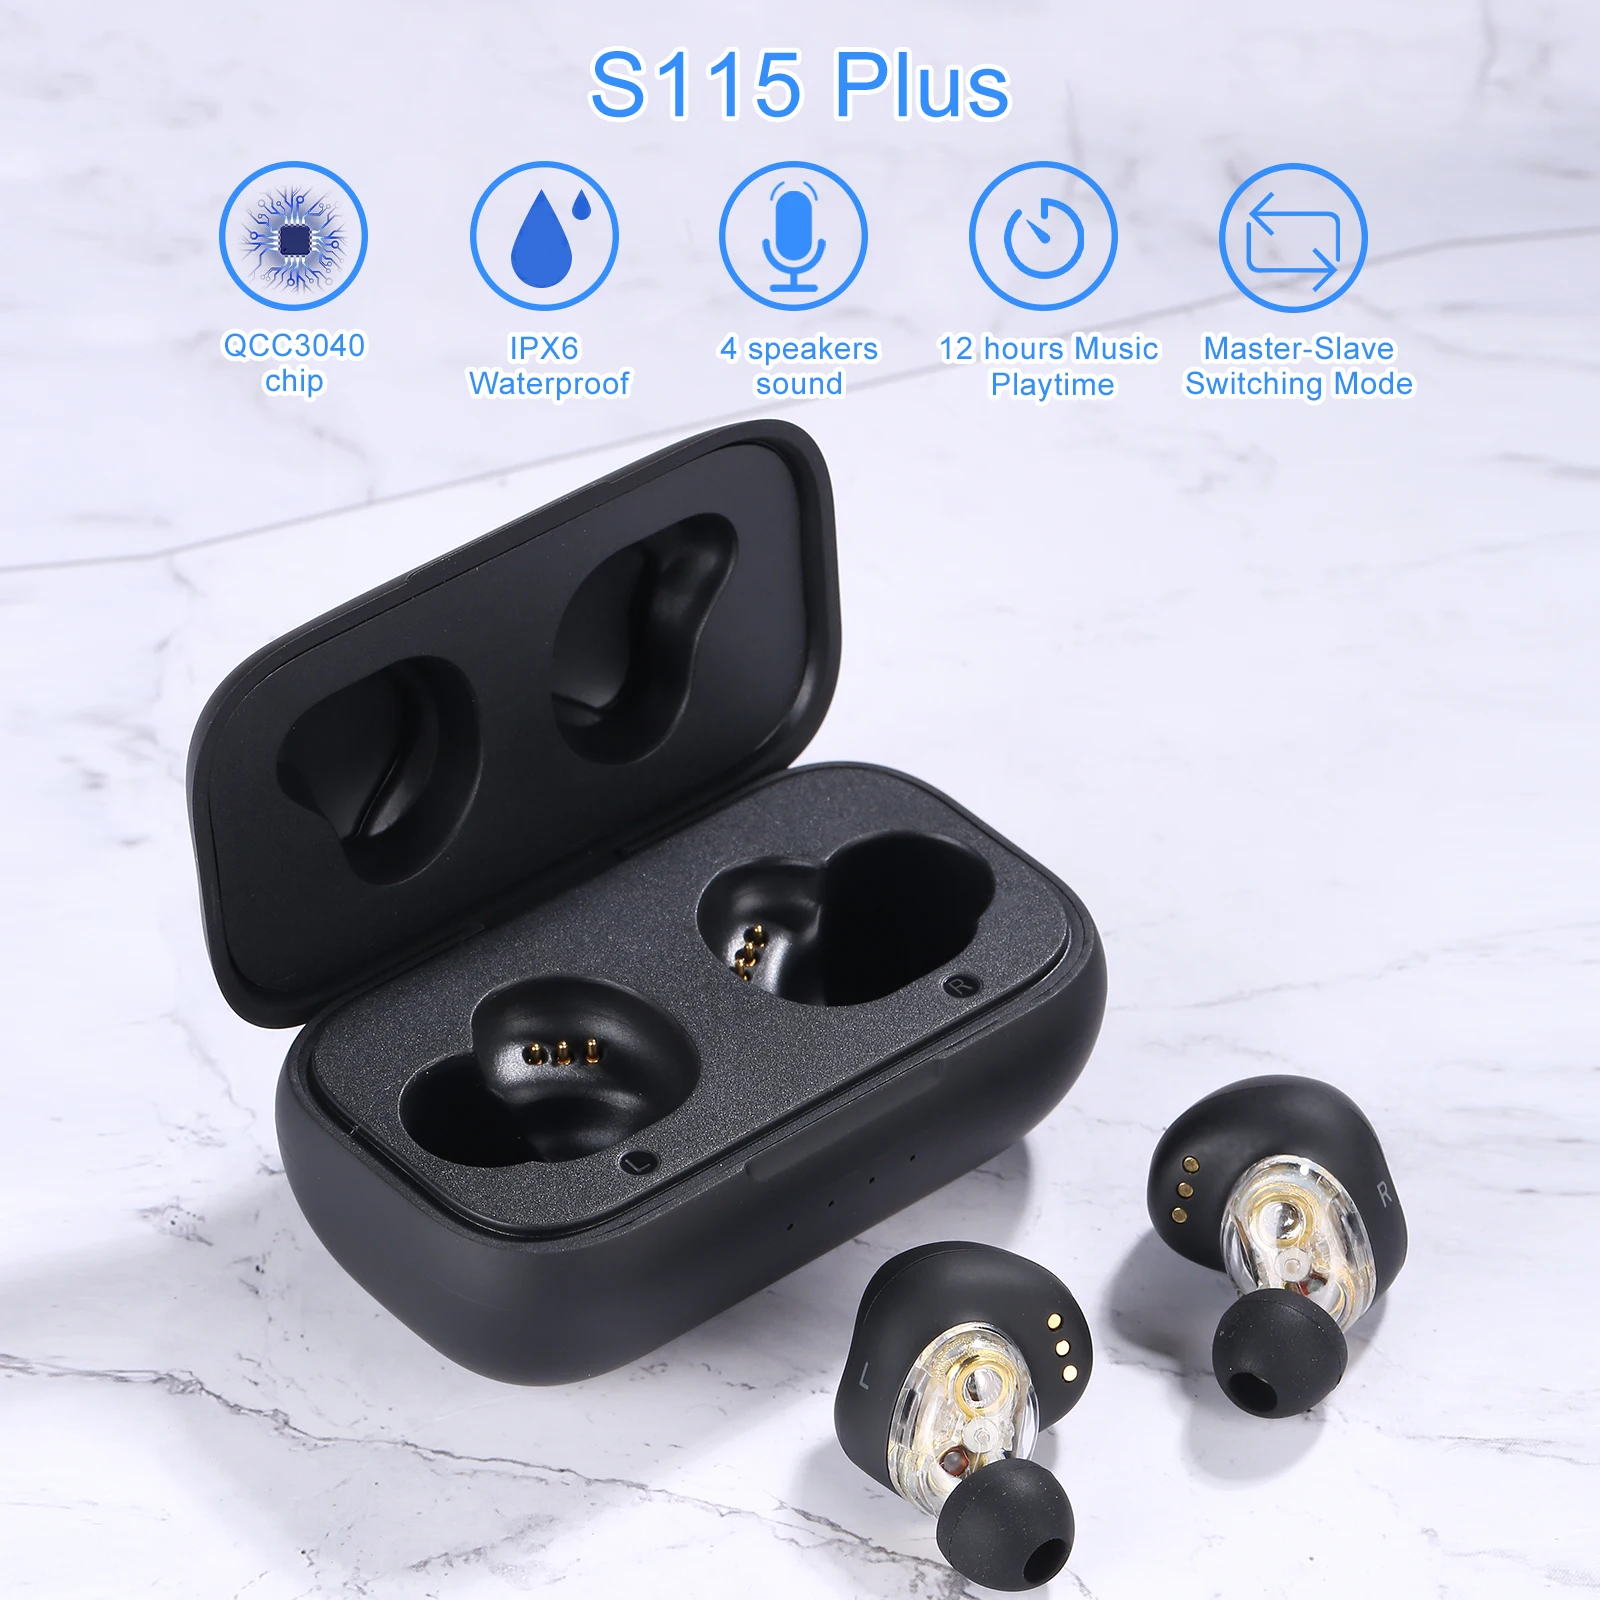 Newest SYLLABLE S115 Plus TWS of QCC3040 Chip Fit for V5.2 Earphones 12 hours True Wireless Stereo Earbuds Strong bass Headset